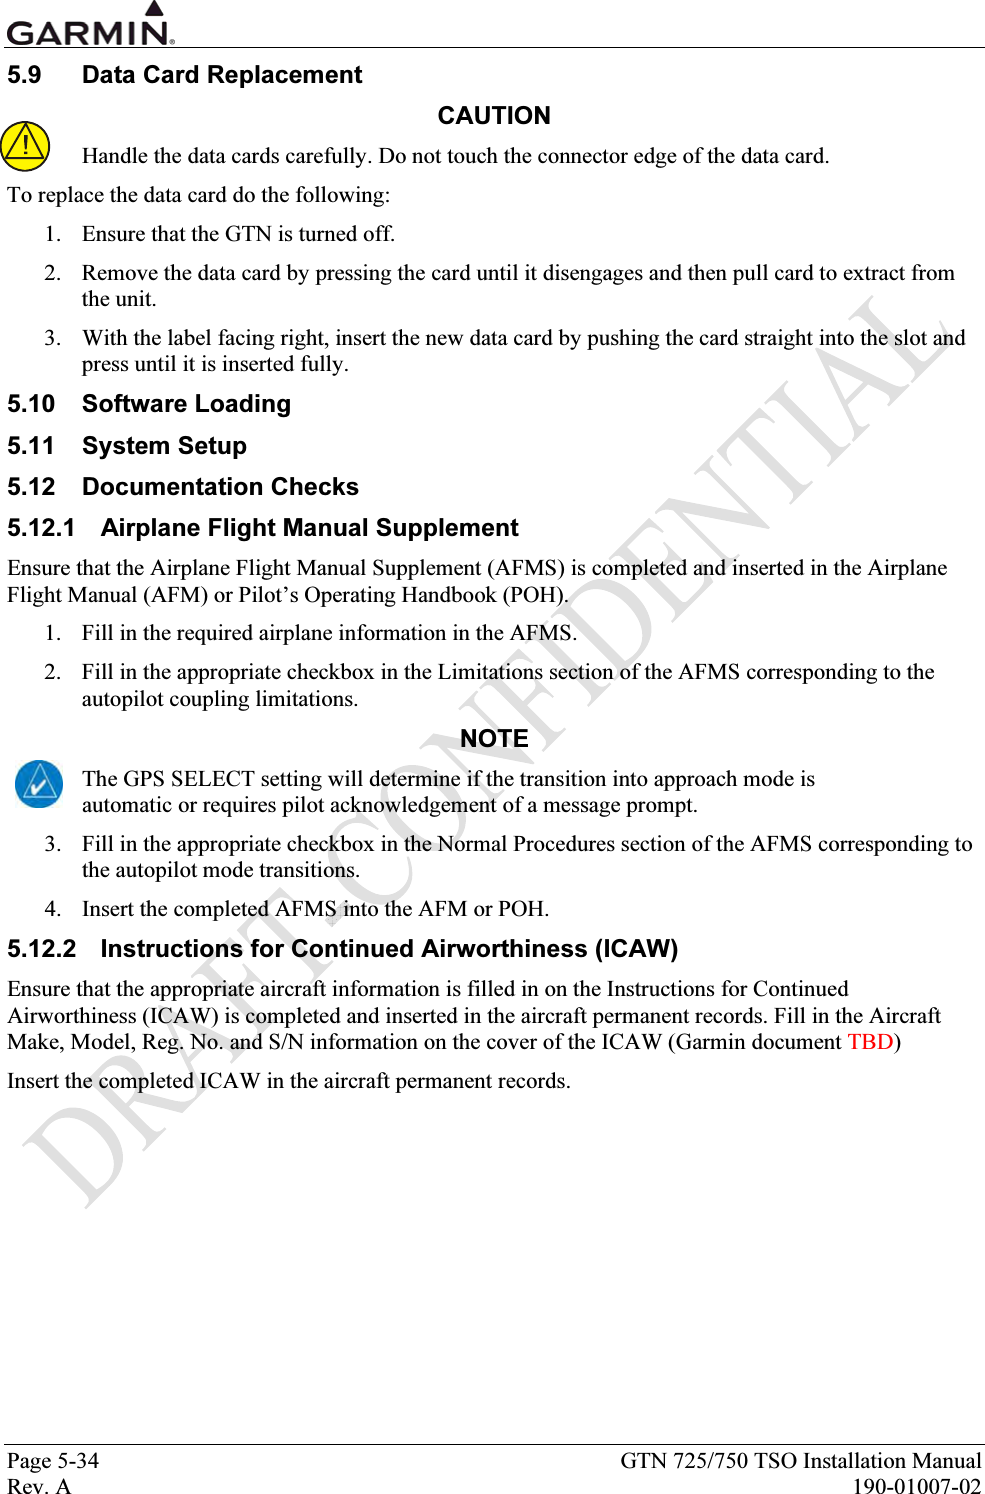  Page 5-34  GTN 725/750 TSO Installation Manual Rev. A  190-01007-02 5.9  Data Card Replacement CAUTION Handle the data cards carefully. Do not touch the connector edge of the data card.  To replace the data card do the following:  1. Ensure that the GTN is turned off.  2. Remove the data card by pressing the card until it disengages and then pull card to extract from the unit.  3. With the label facing right, insert the new data card by pushing the card straight into the slot and press until it is inserted fully. 5.10 Software Loading 5.11 System Setup 5.12 Documentation Checks 5.12.1  Airplane Flight Manual Supplement Ensure that the Airplane Flight Manual Supplement (AFMS) is completed and inserted in the Airplane Flight Manual (AFM) or Pilot’s Operating Handbook (POH). 1. Fill in the required airplane information in the AFMS. 2. Fill in the appropriate checkbox in the Limitations section of the AFMS corresponding to the autopilot coupling limitations. NOTE The GPS SELECT setting will determine if the transition into approach mode is automatic or requires pilot acknowledgement of a message prompt. 3. Fill in the appropriate checkbox in the Normal Procedures section of the AFMS corresponding to the autopilot mode transitions. 4. Insert the completed AFMS into the AFM or POH. 5.12.2  Instructions for Continued Airworthiness (ICAW) Ensure that the appropriate aircraft information is filled in on the Instructions for Continued Airworthiness (ICAW) is completed and inserted in the aircraft permanent records. Fill in the Aircraft Make, Model, Reg. No. and S/N information on the cover of the ICAW (Garmin document TBD) Insert the completed ICAW in the aircraft permanent records. 